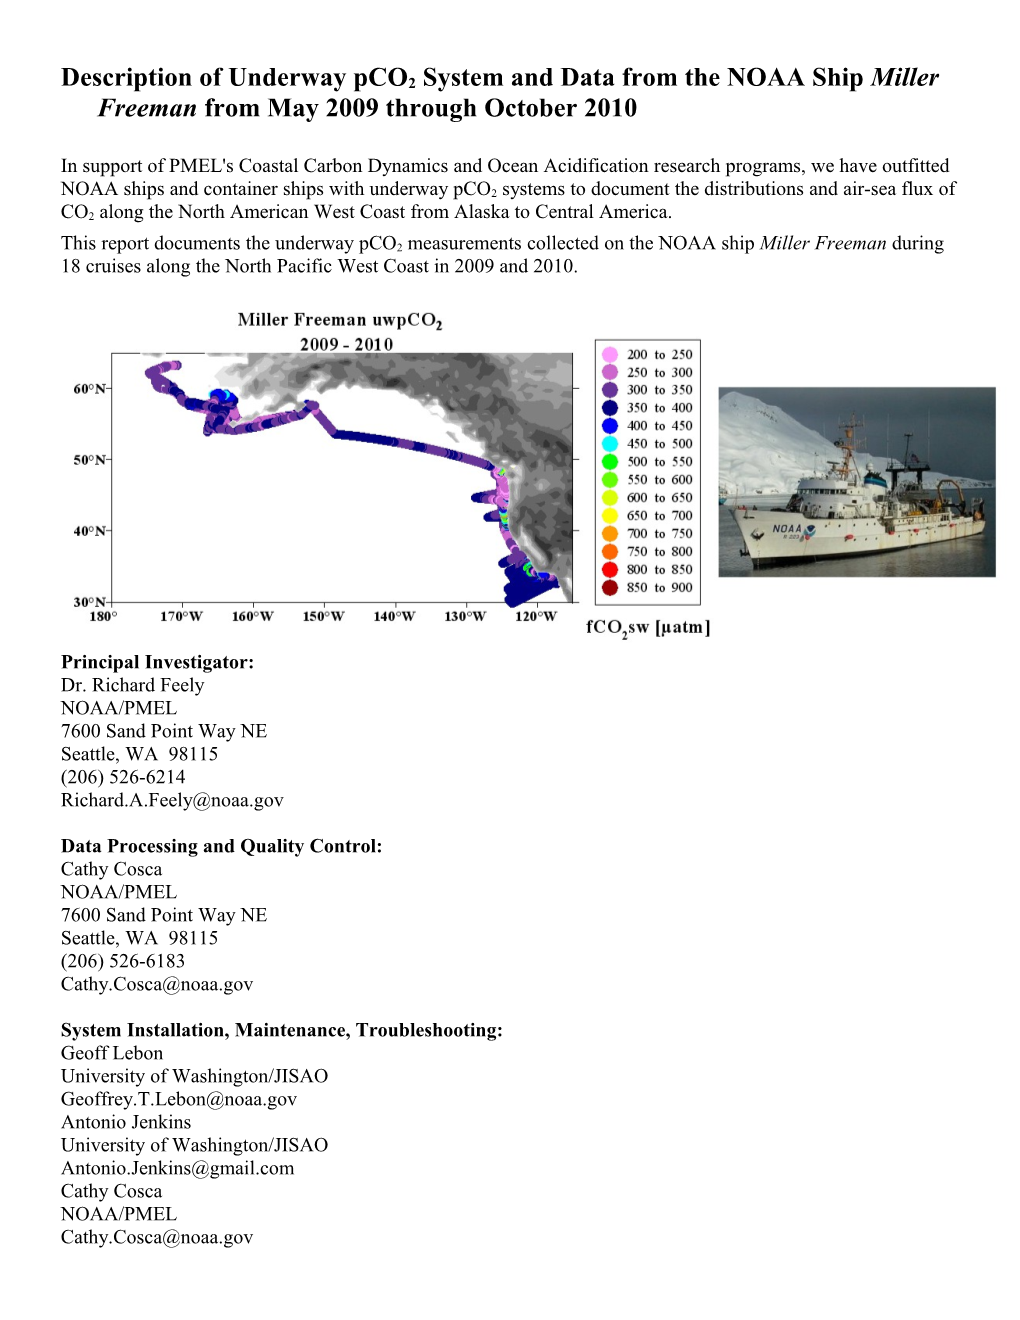 Description of Underway Pco2 System and Data from the NOAA Ship Miller Freeman from May